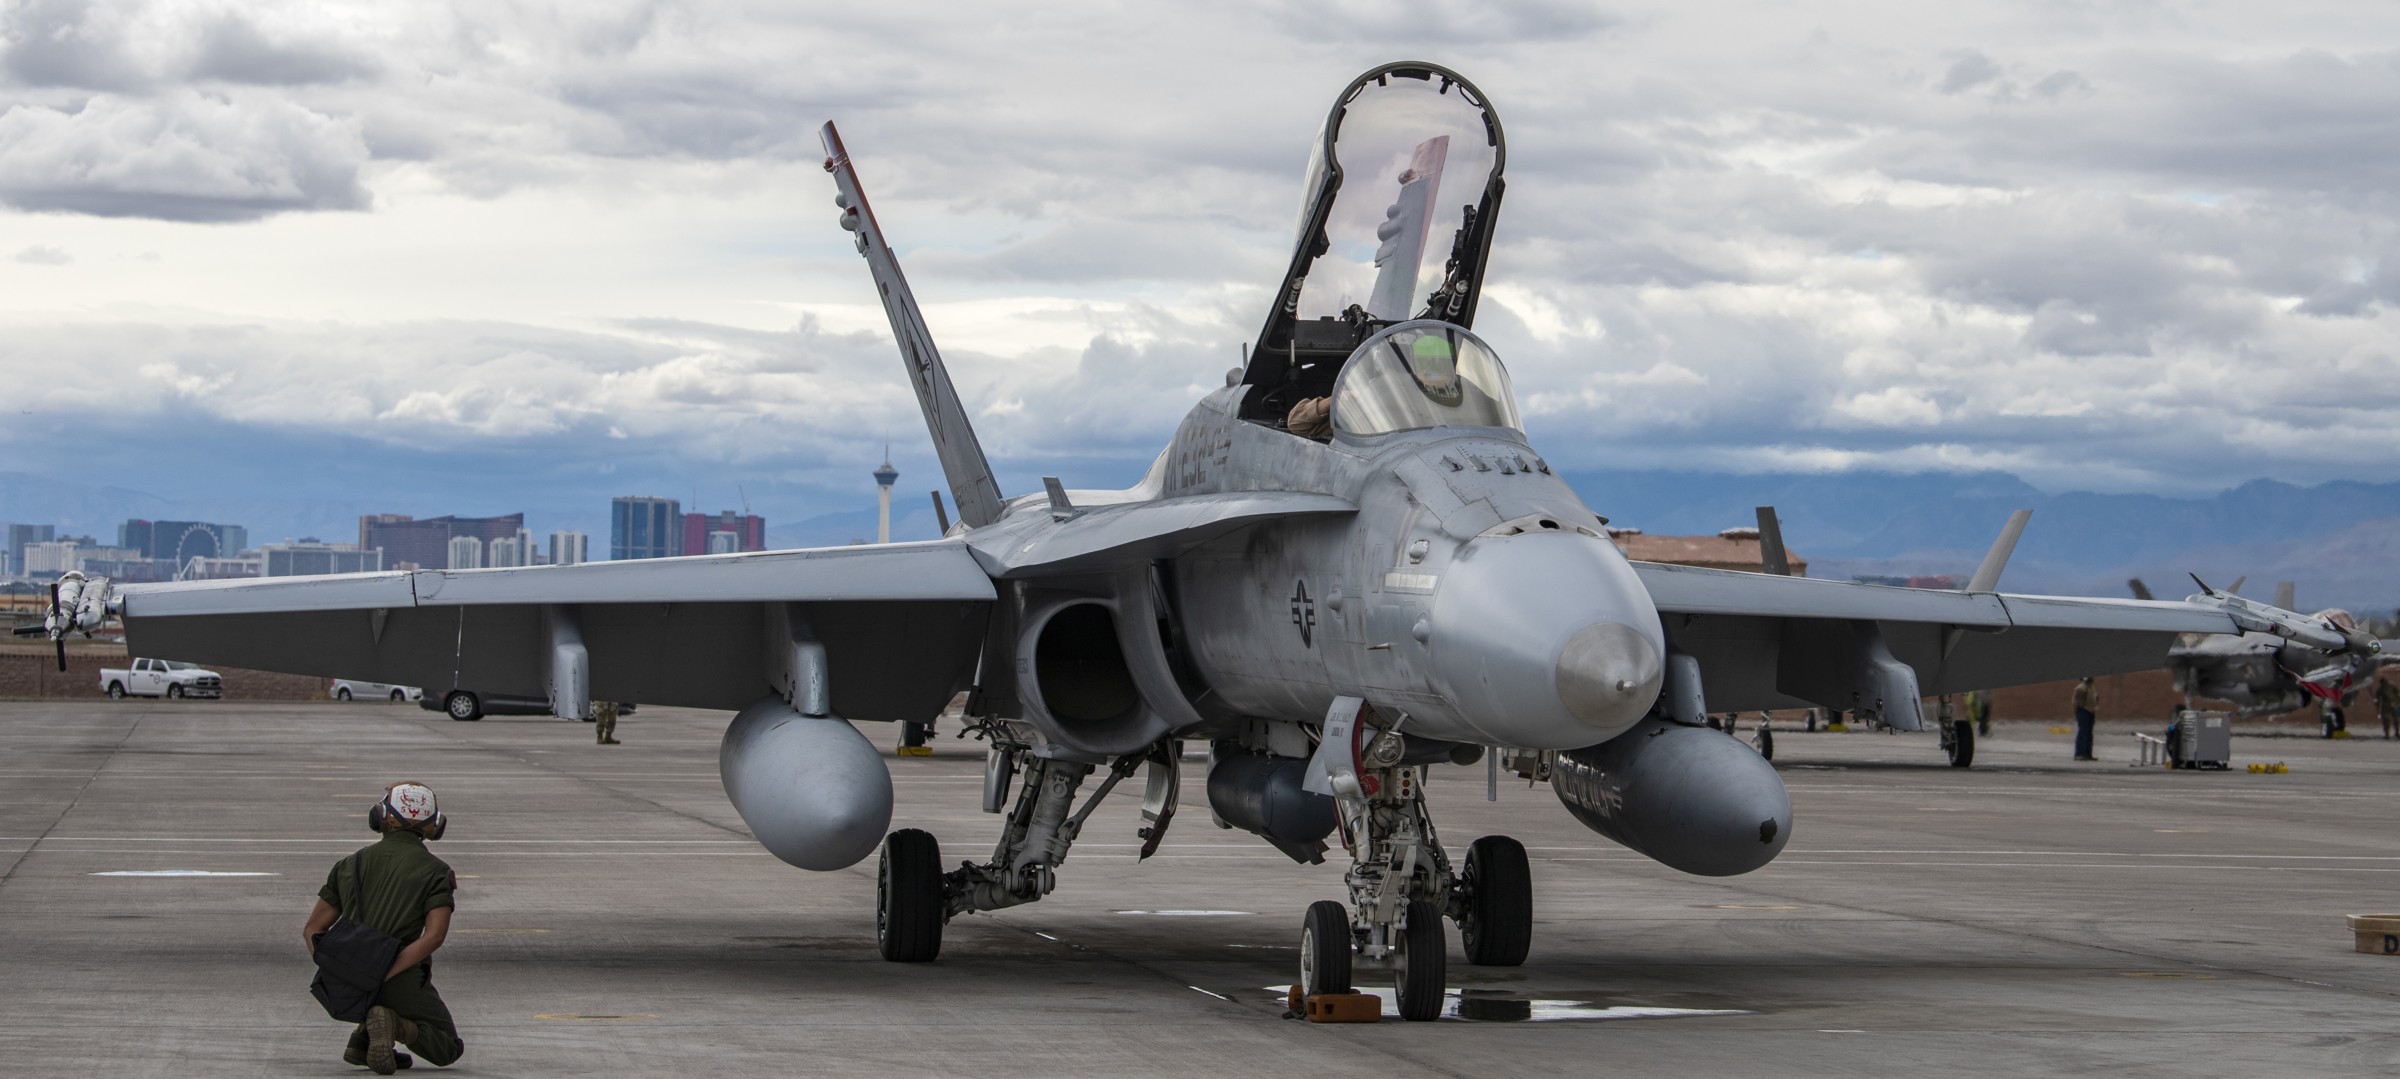 vmfa-232 red devils marine fighter attack squadron usmc f/a-18c hornet 223 exercise red flag nellis afb nevada